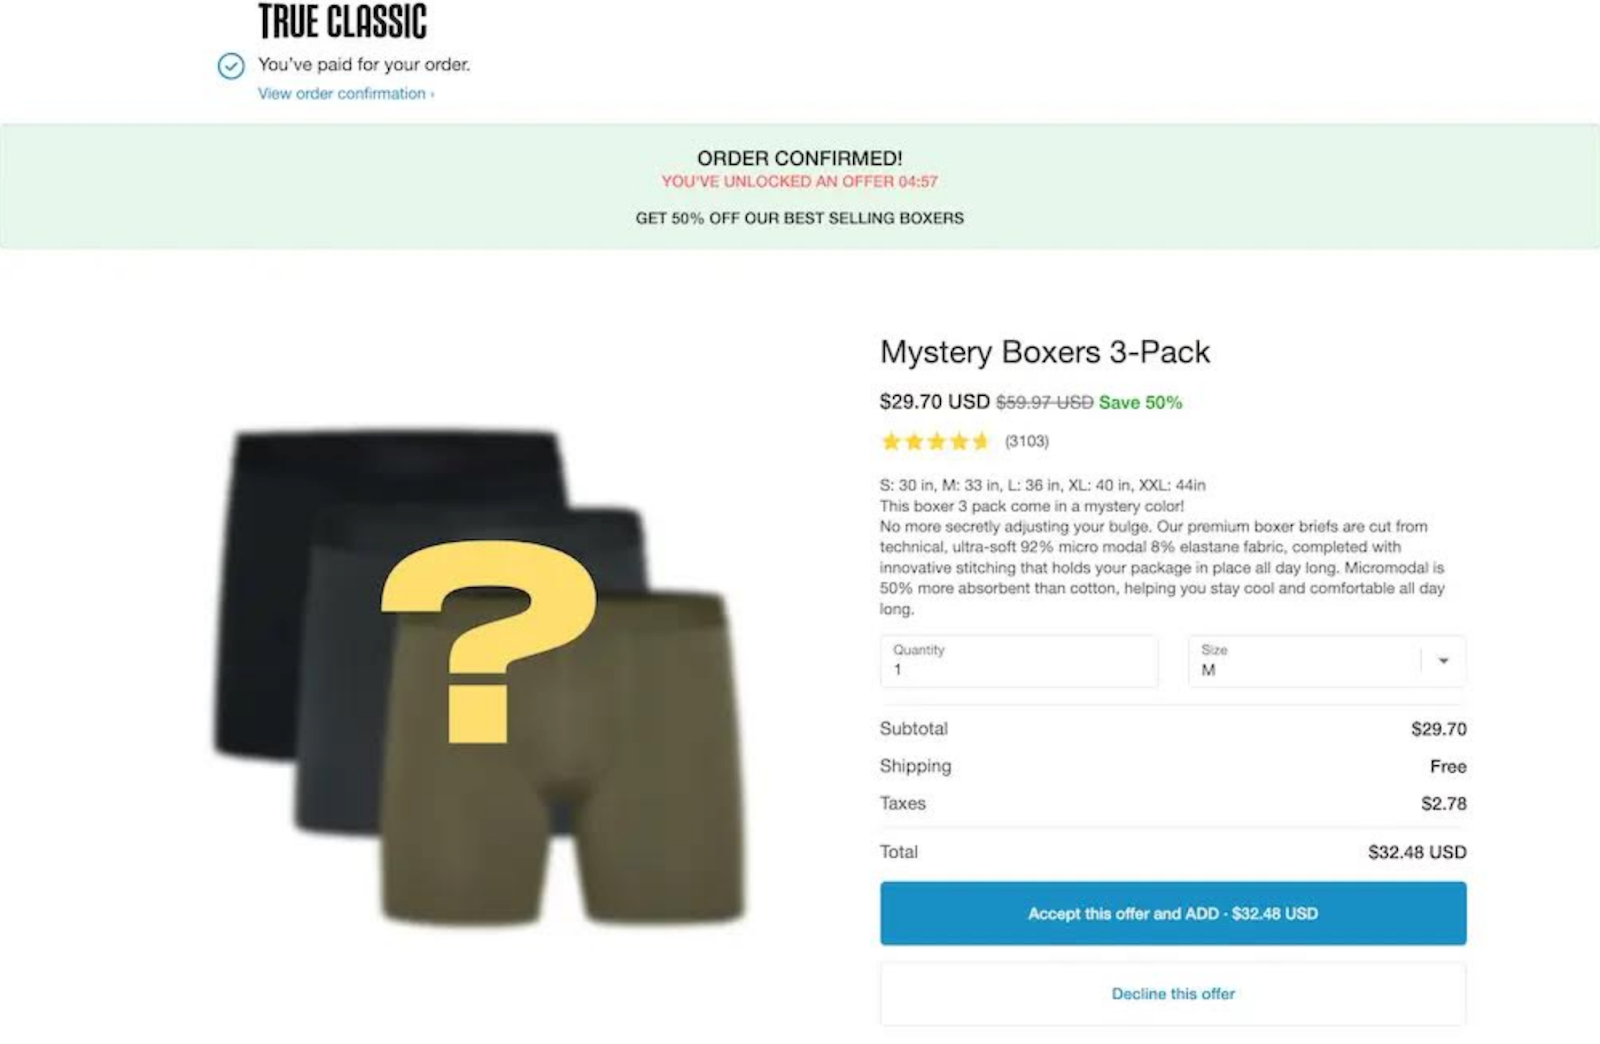 True Classic order confirmation page with information on a mystery underwear set and a blurry image of boxers.